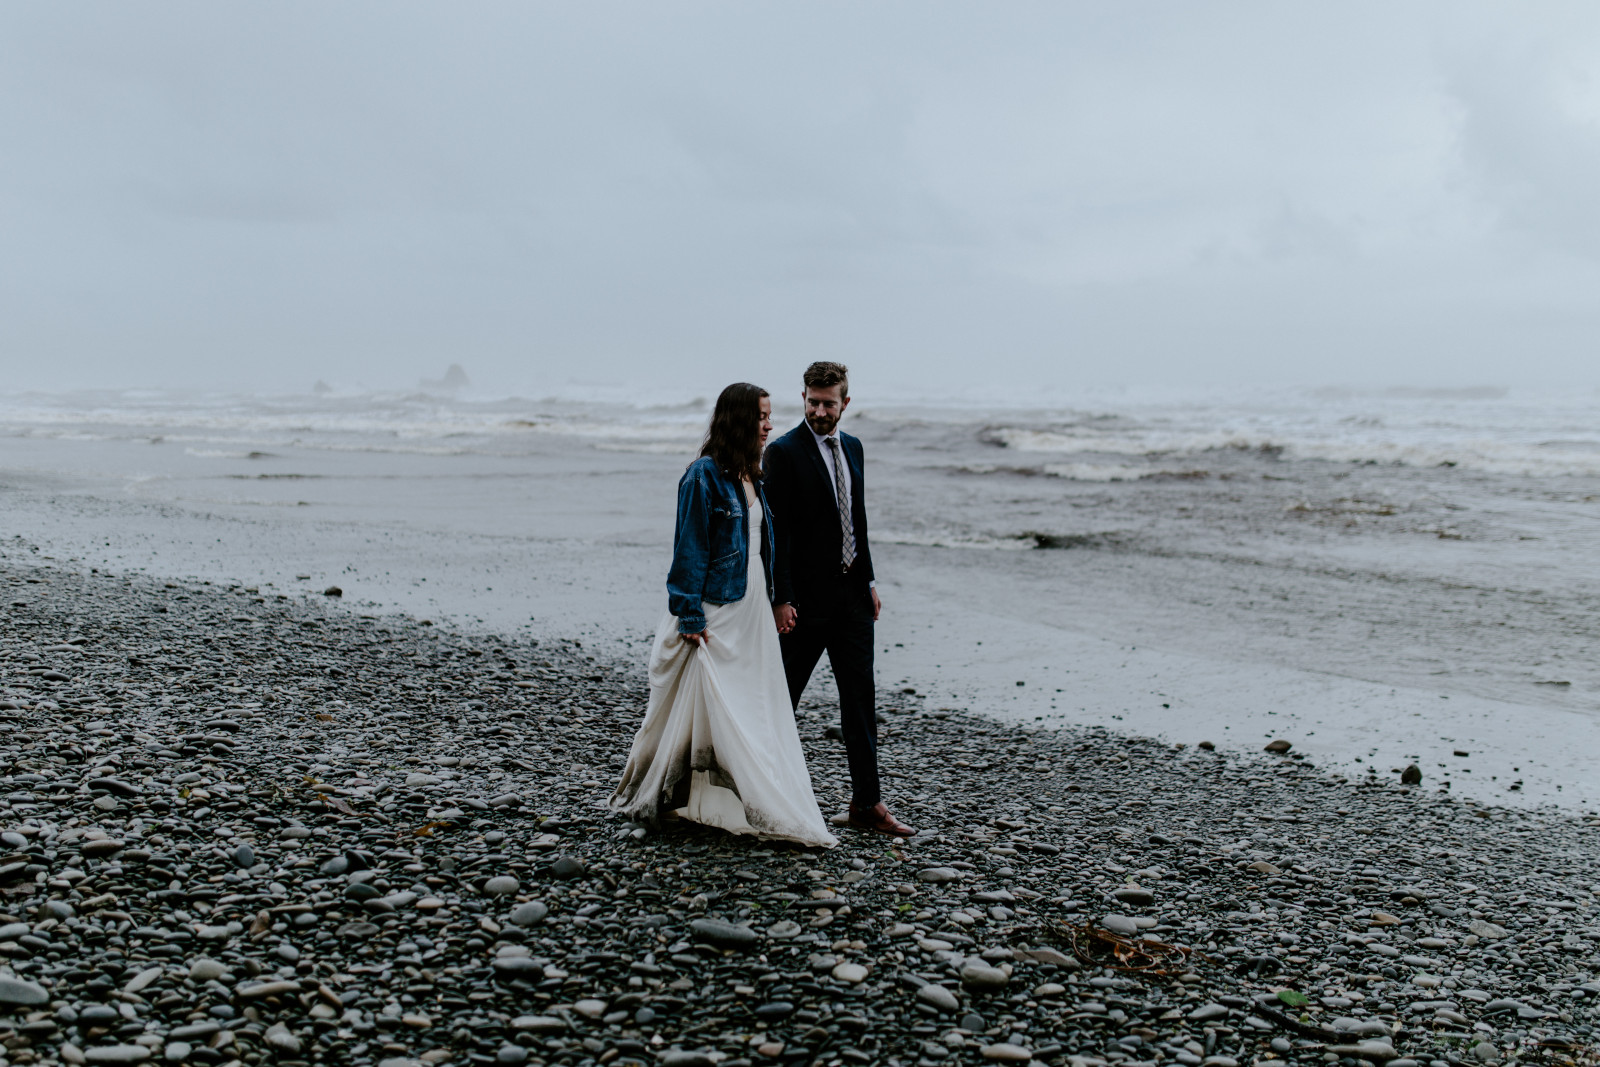 Mollie and Corey walk in the rain on the beach. Elopement photography at Olympic National Park by Sienna Plus Josh.